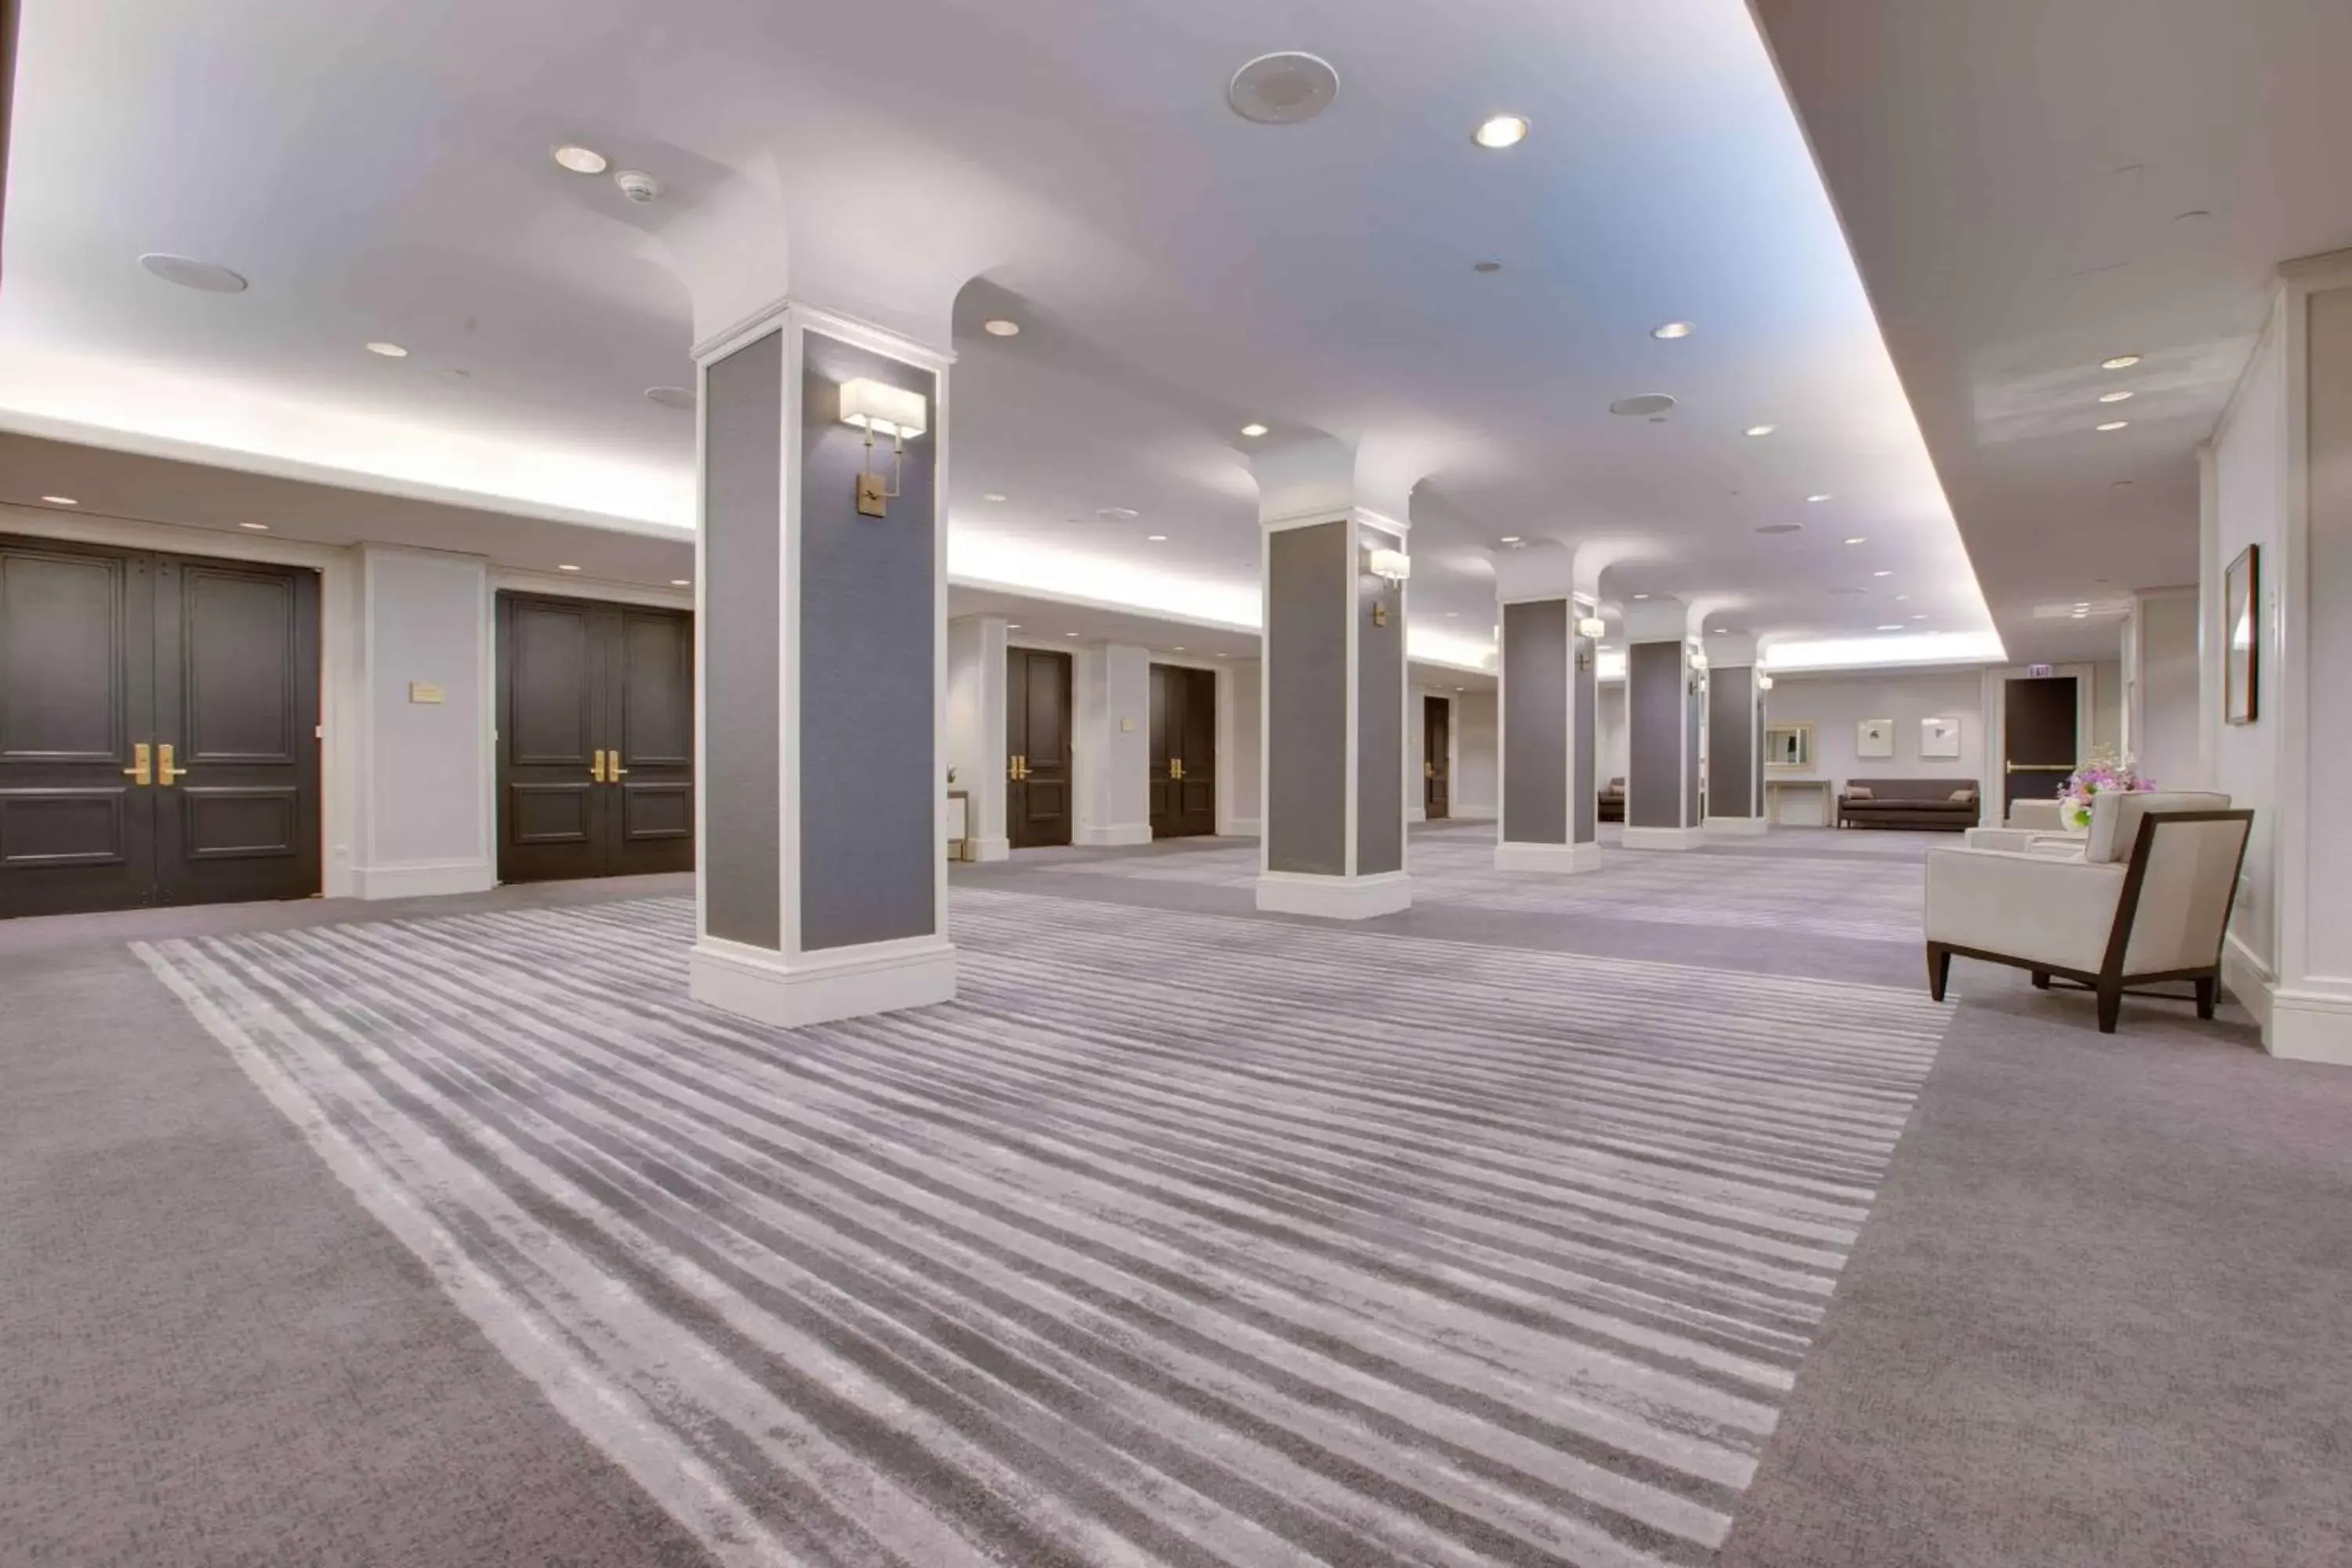 Meeting/conference room in Hilton Newark Airport